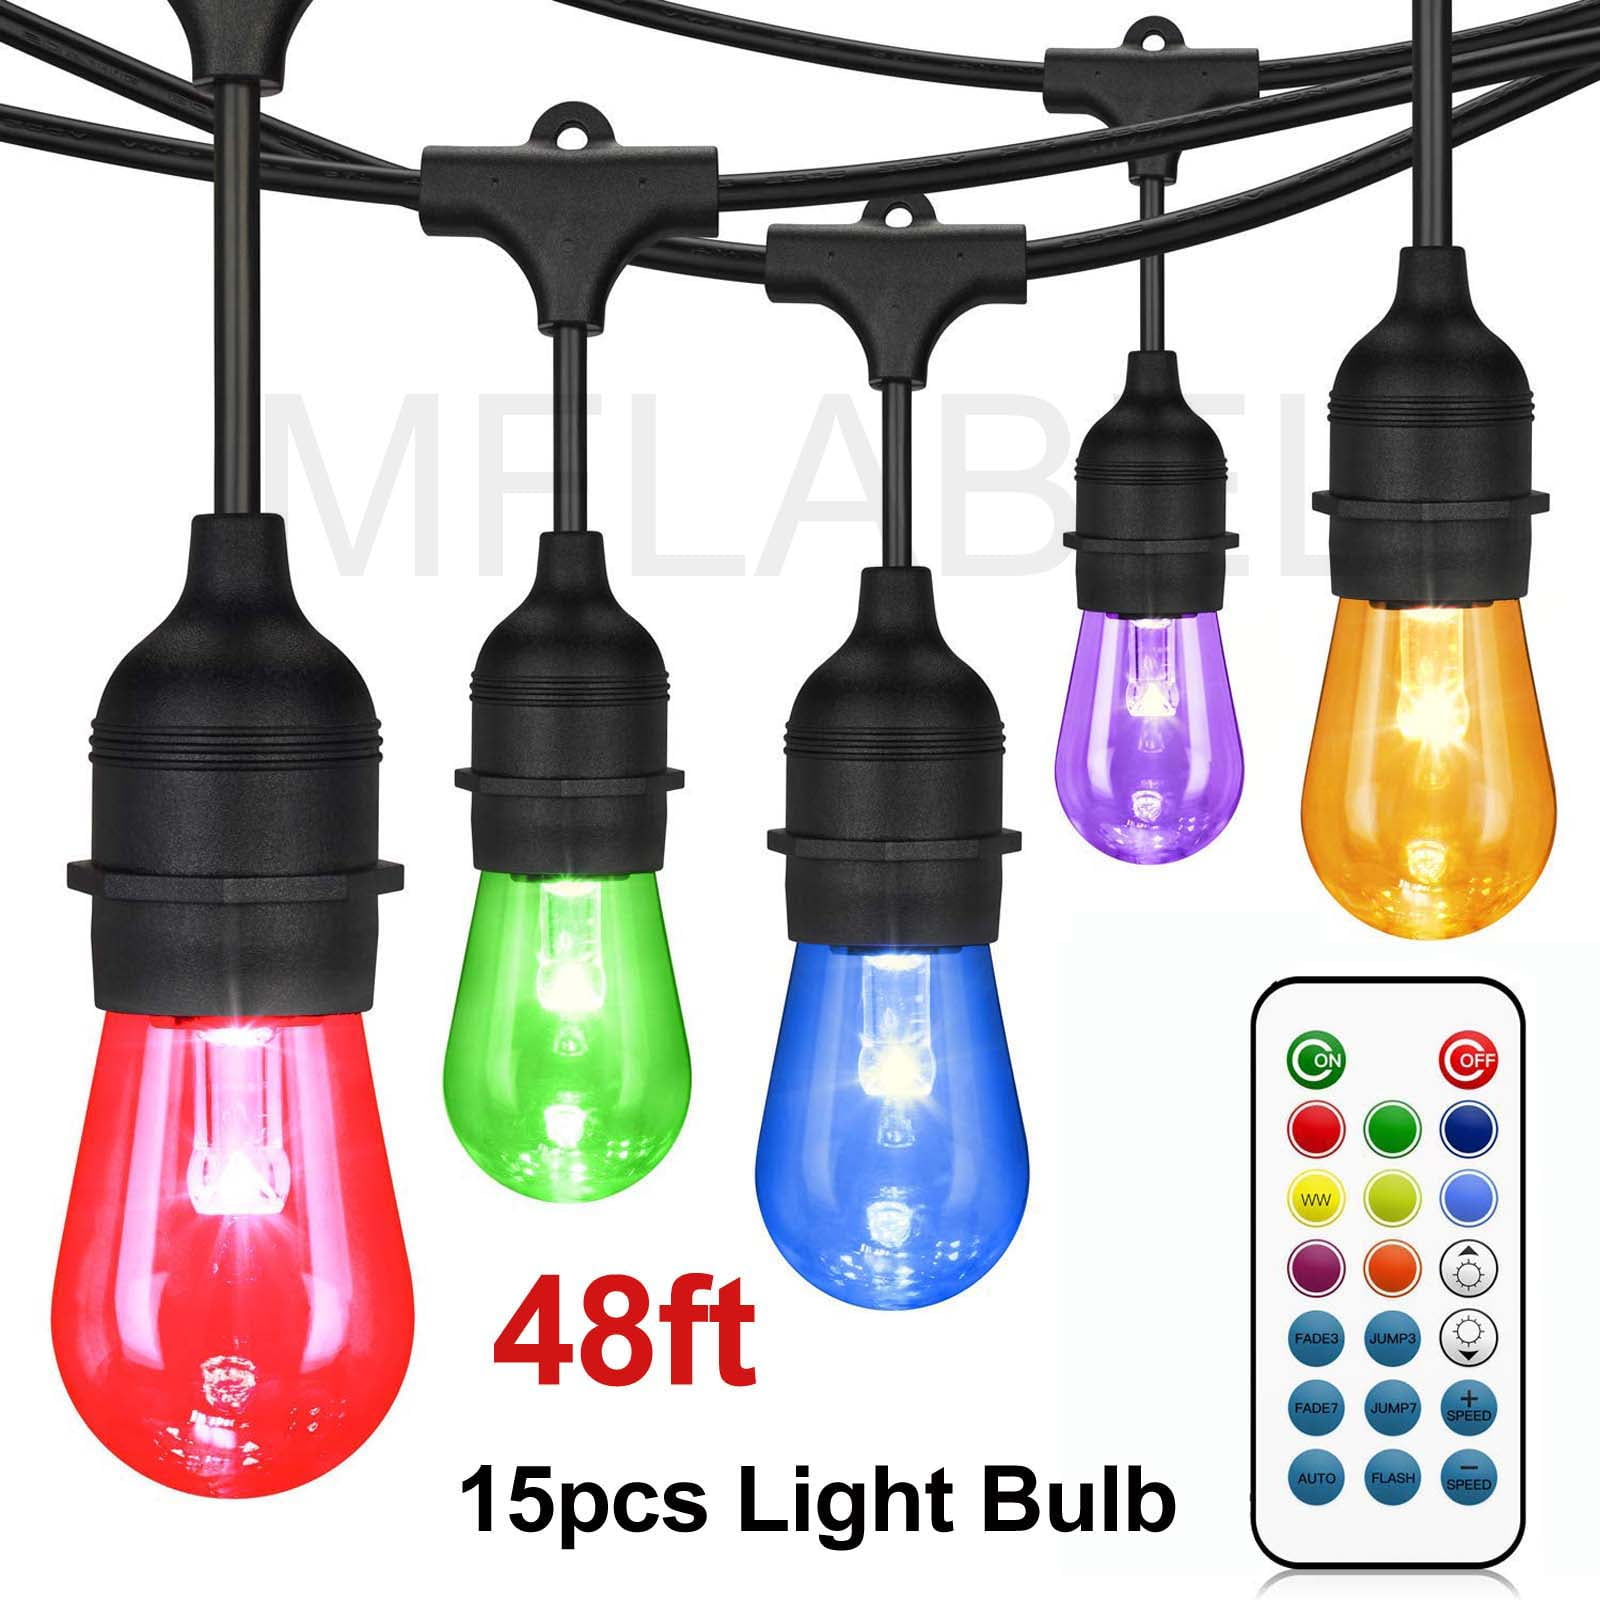 Details about   38FT Outdoor String Lights LED Waterproof Color Changing 14 RGB Dimmable Bulbs